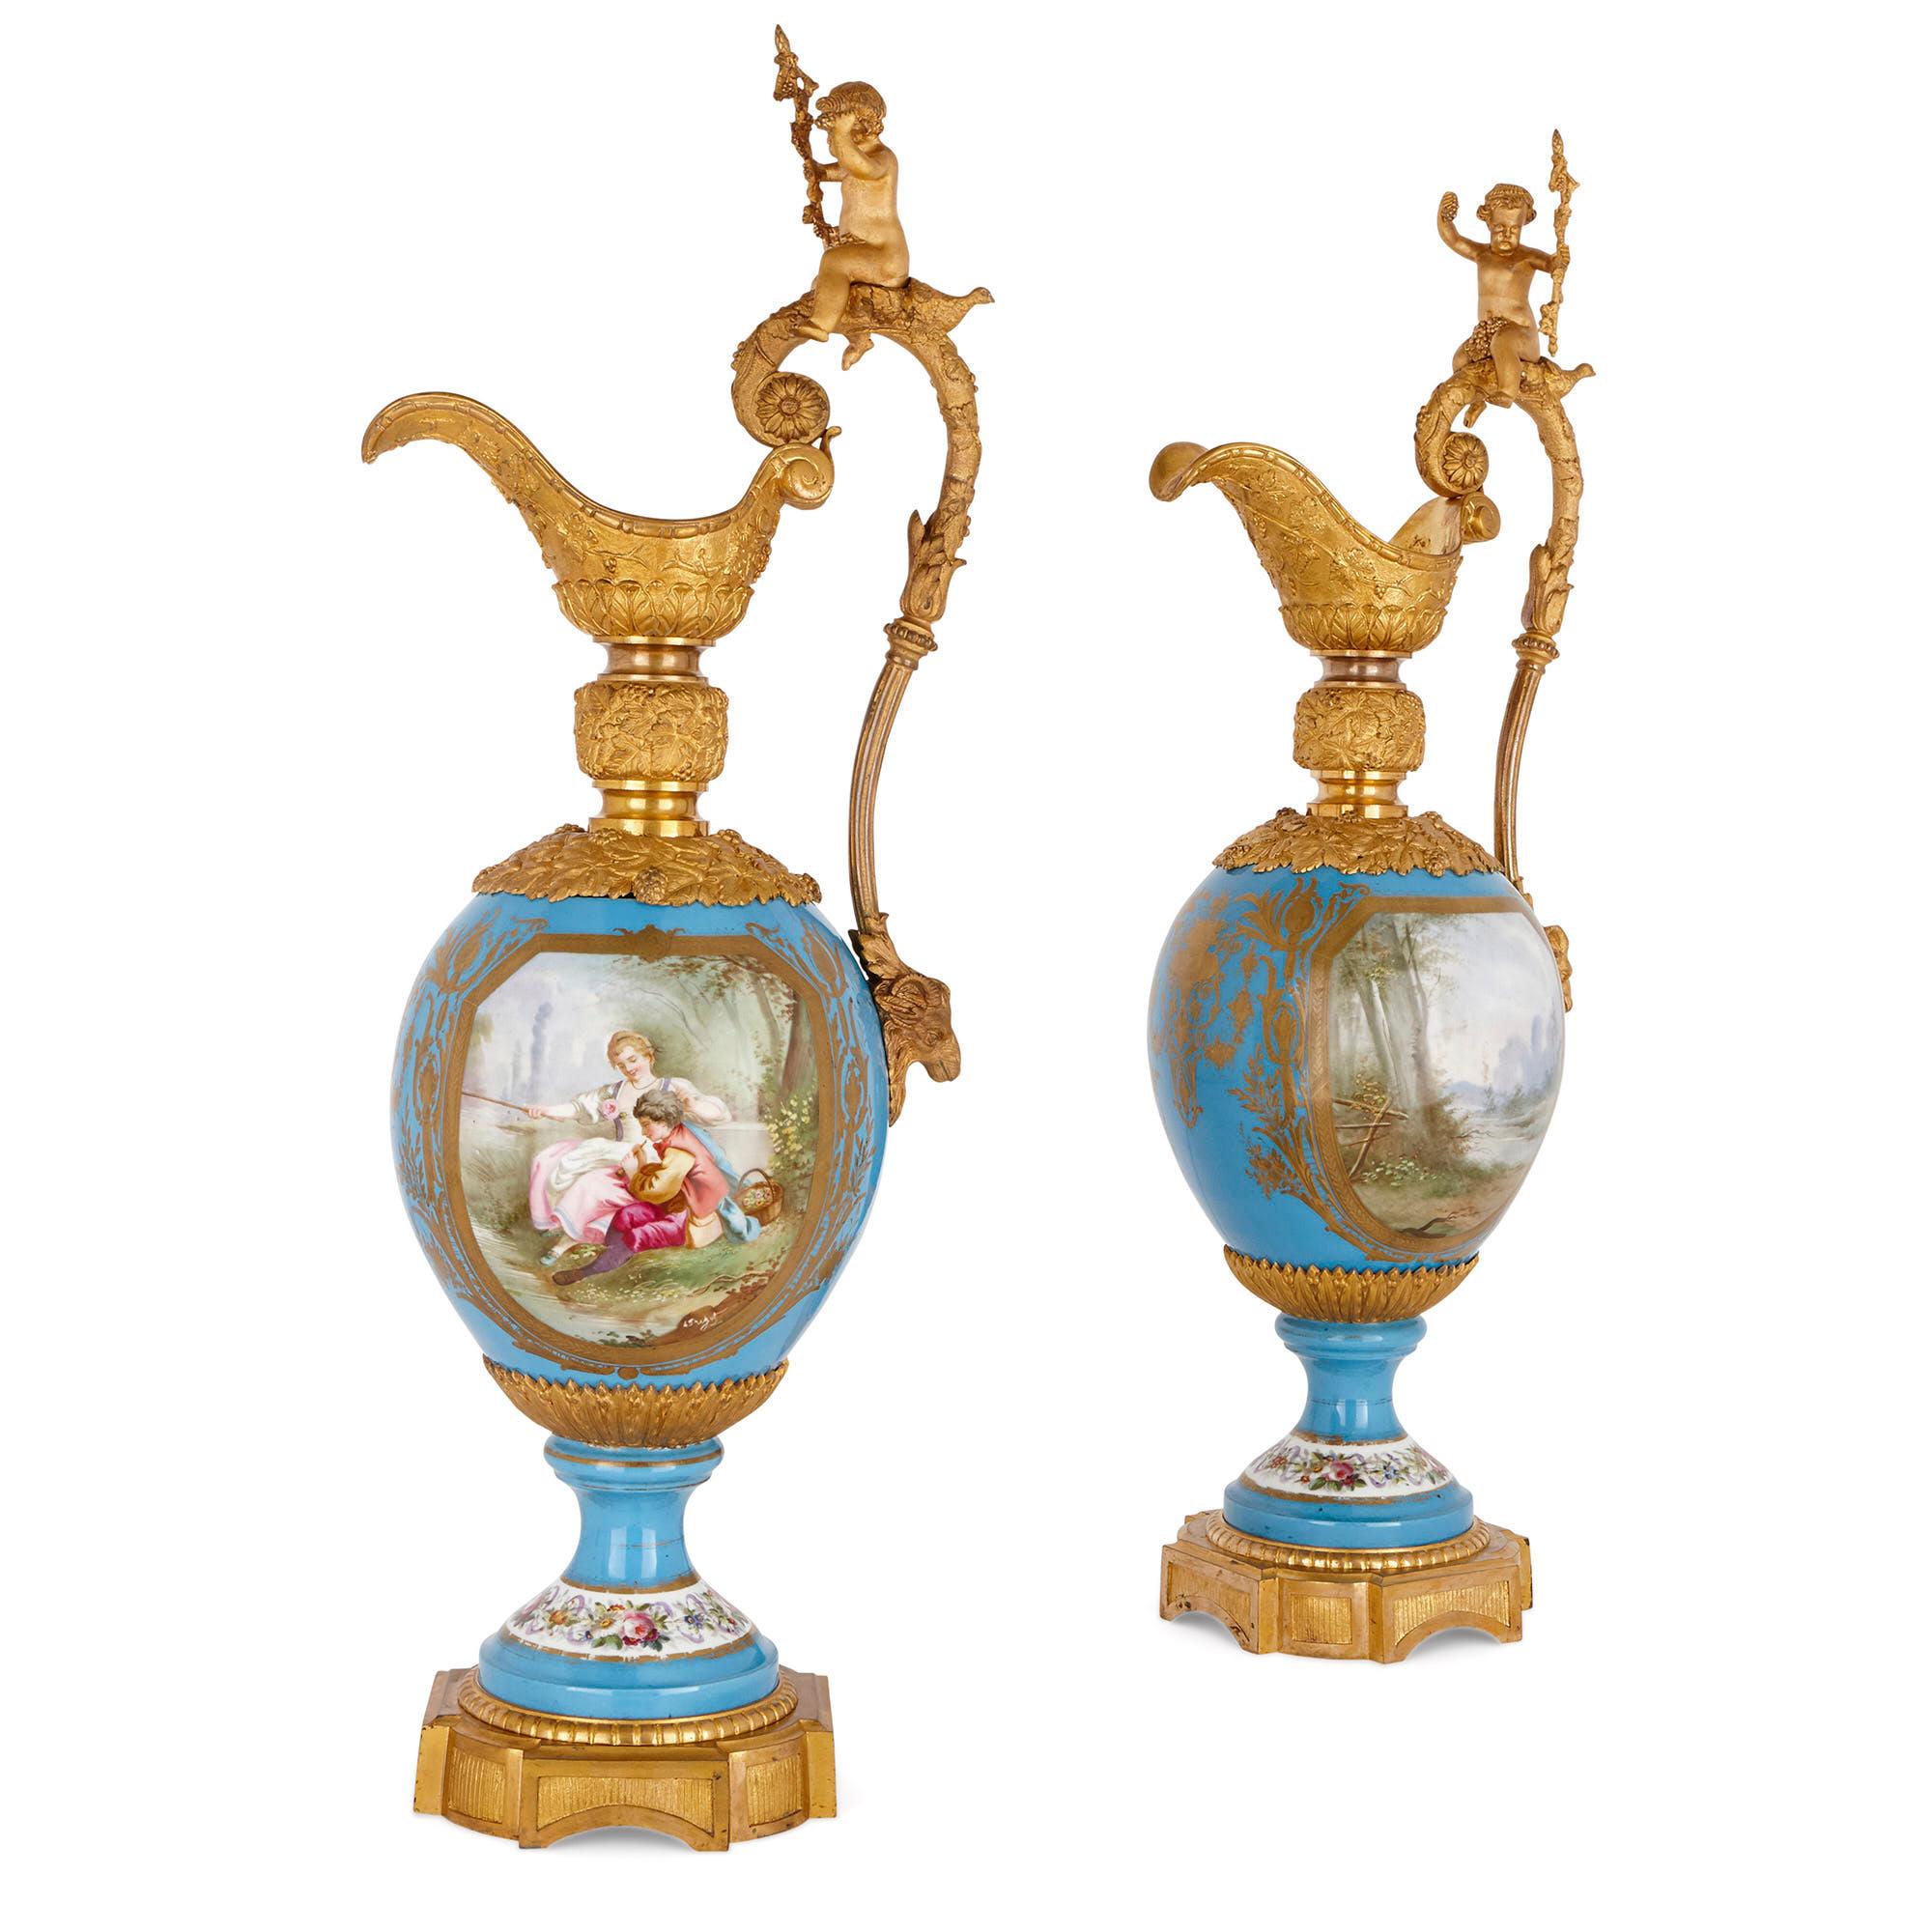 These jugs (ewers) are magnificent works of decorative art which measure an impressive 1m (39 inches) in height. In their decoration, the jugs are clearly inspired by 18th century Rococo style wares created by the Sèvres Porcelain